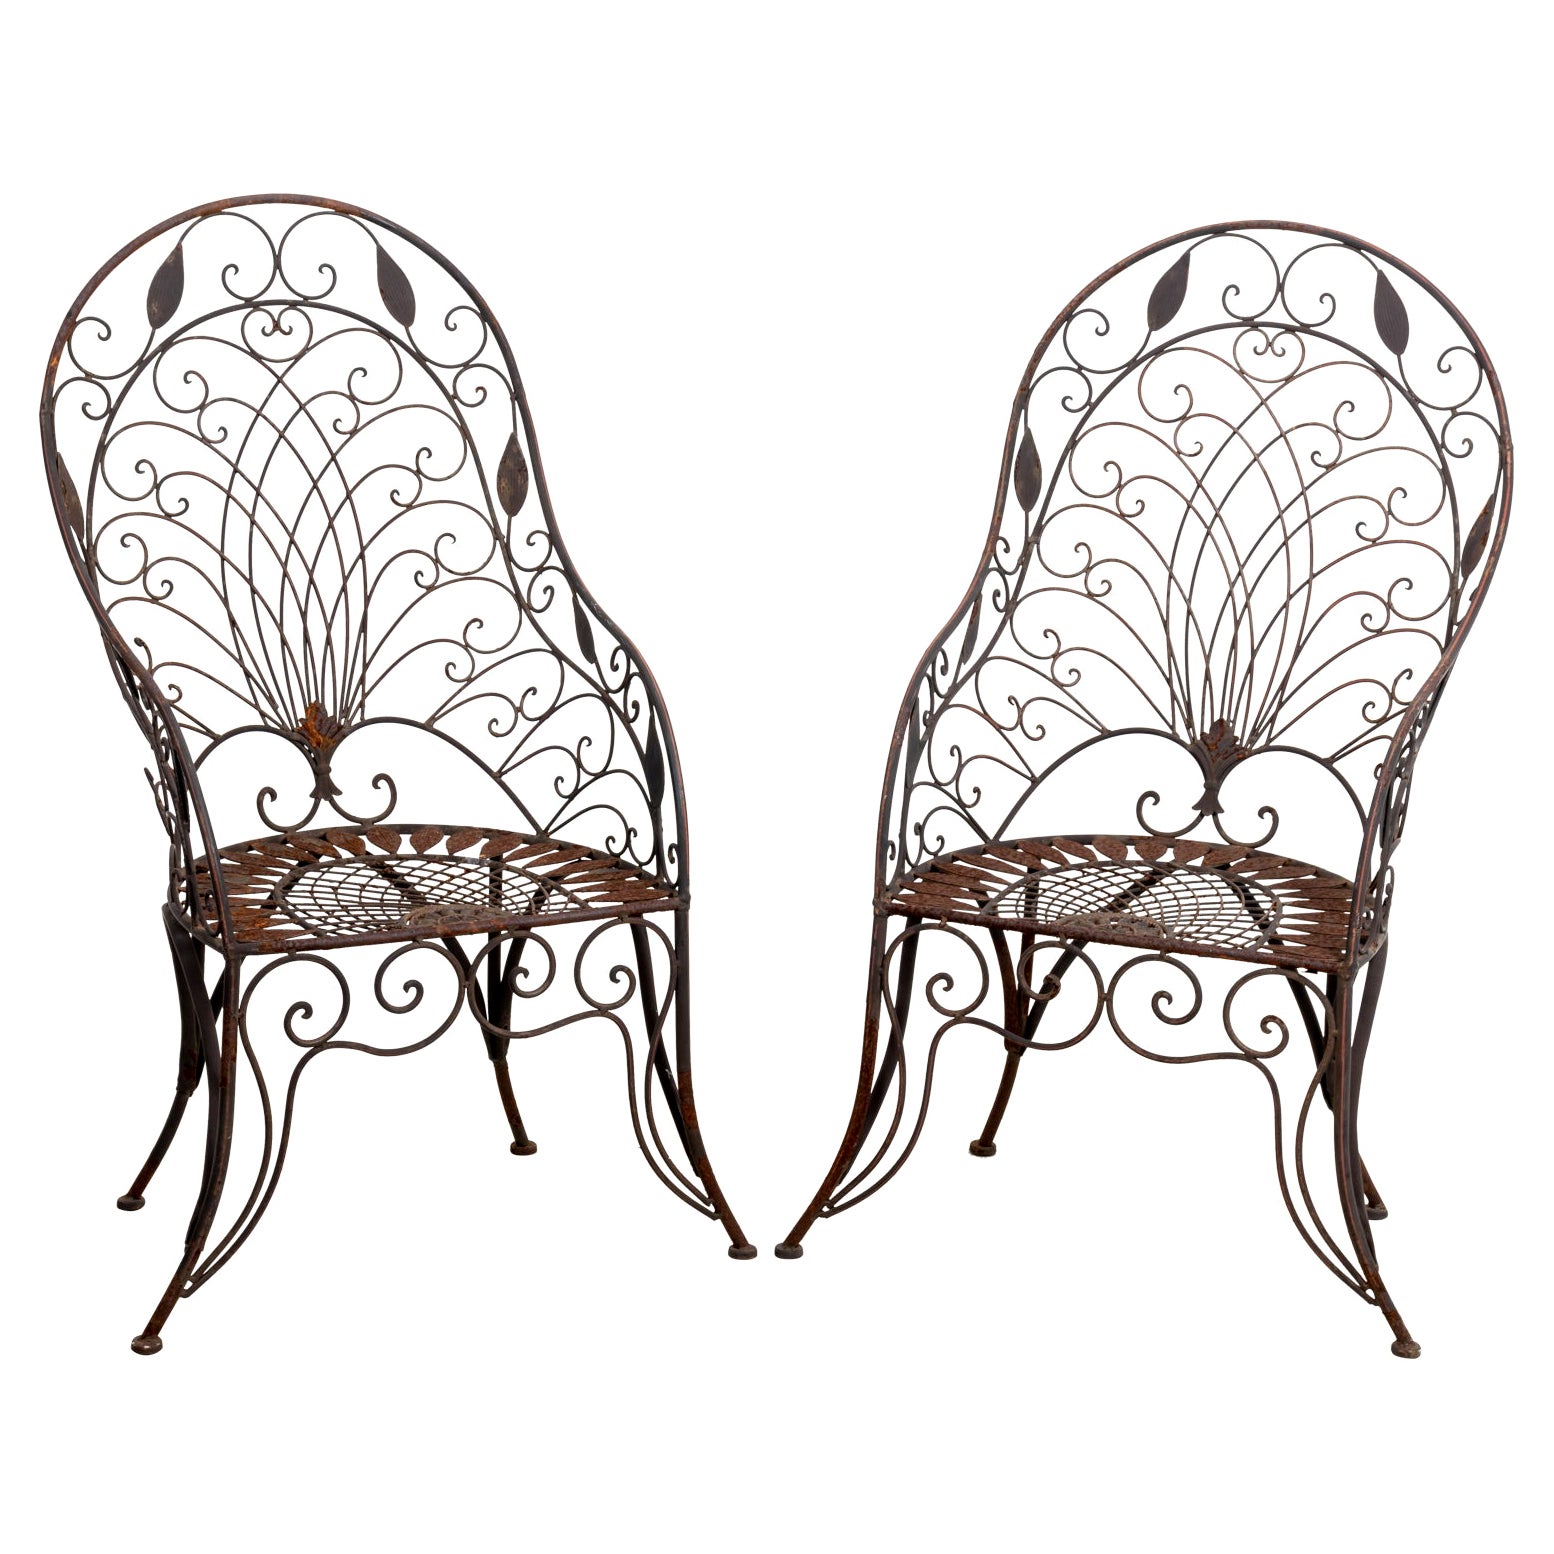 Pair of Wrought Iron Curved Back Garden Chairs with Scrollwork